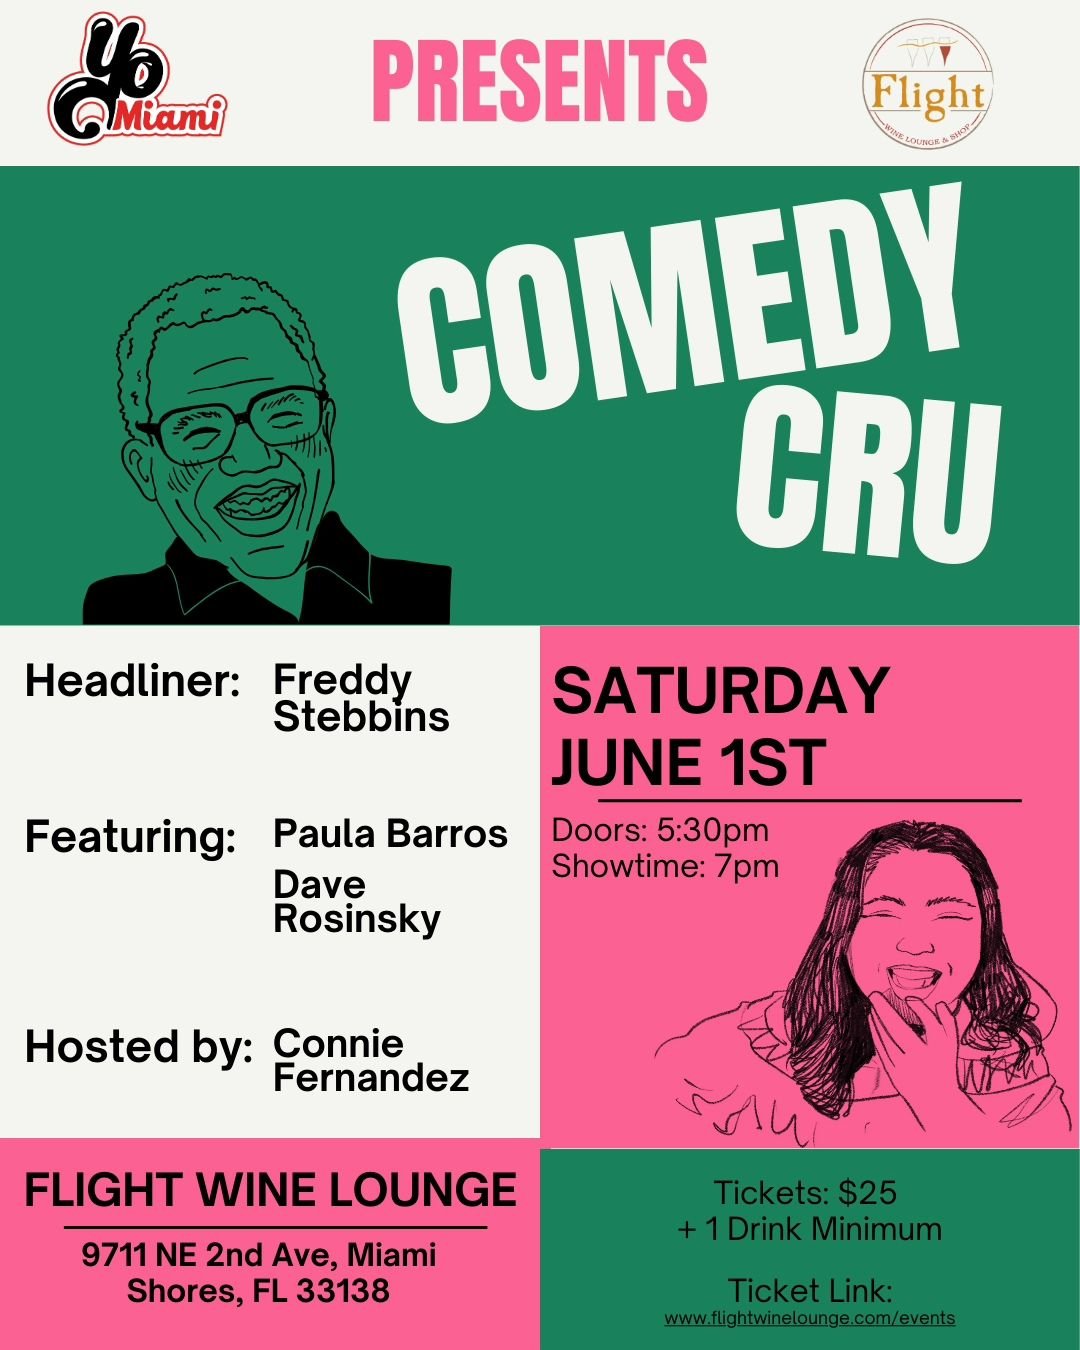 @itsyomiami is bringing the Comedy Cru back to Flight for ONE NIGHT only. Gather some friends and get ready to laugh your socks off! The very talented @conniesaurus is hosting a talented line up of local comedians. It will be an evening of laughter, 